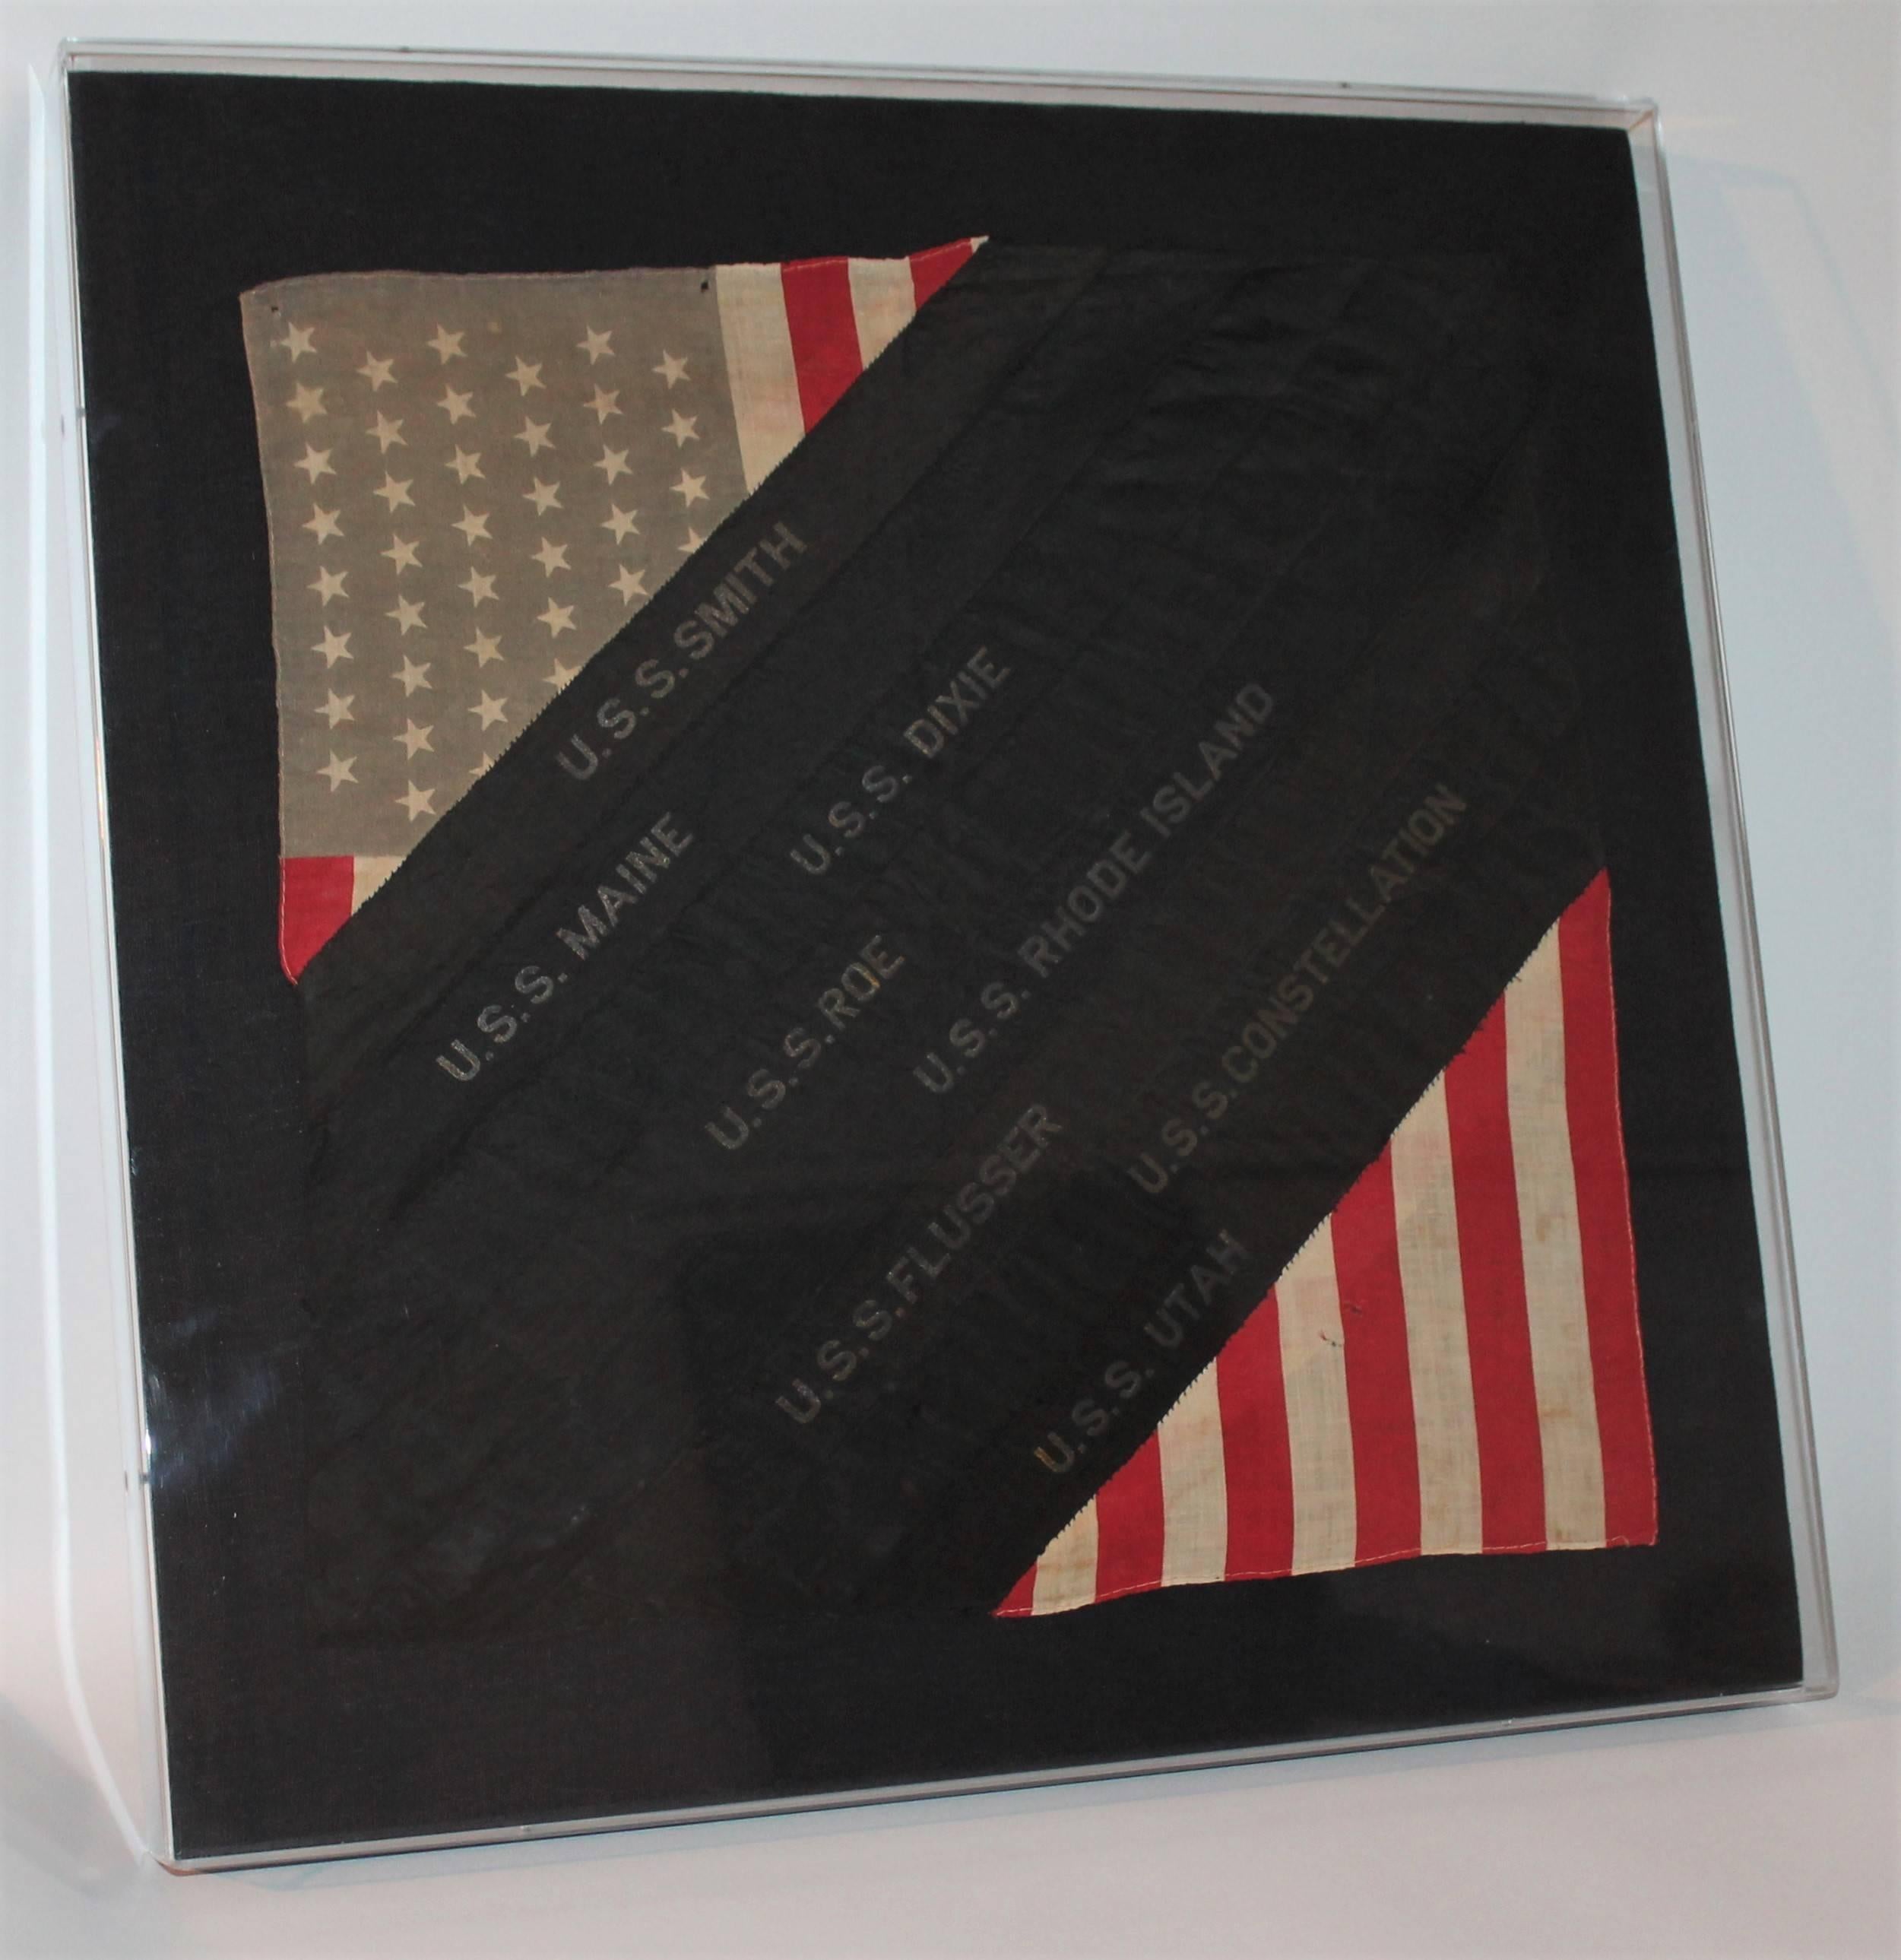 This Great framed Folk Art sham with 48star flag and ship ribbons is a great patriotic item. The top left corner as well as the bottom right corner are scraps of a 48 star linen flag and in between them are ribbons of ships names that are sewn